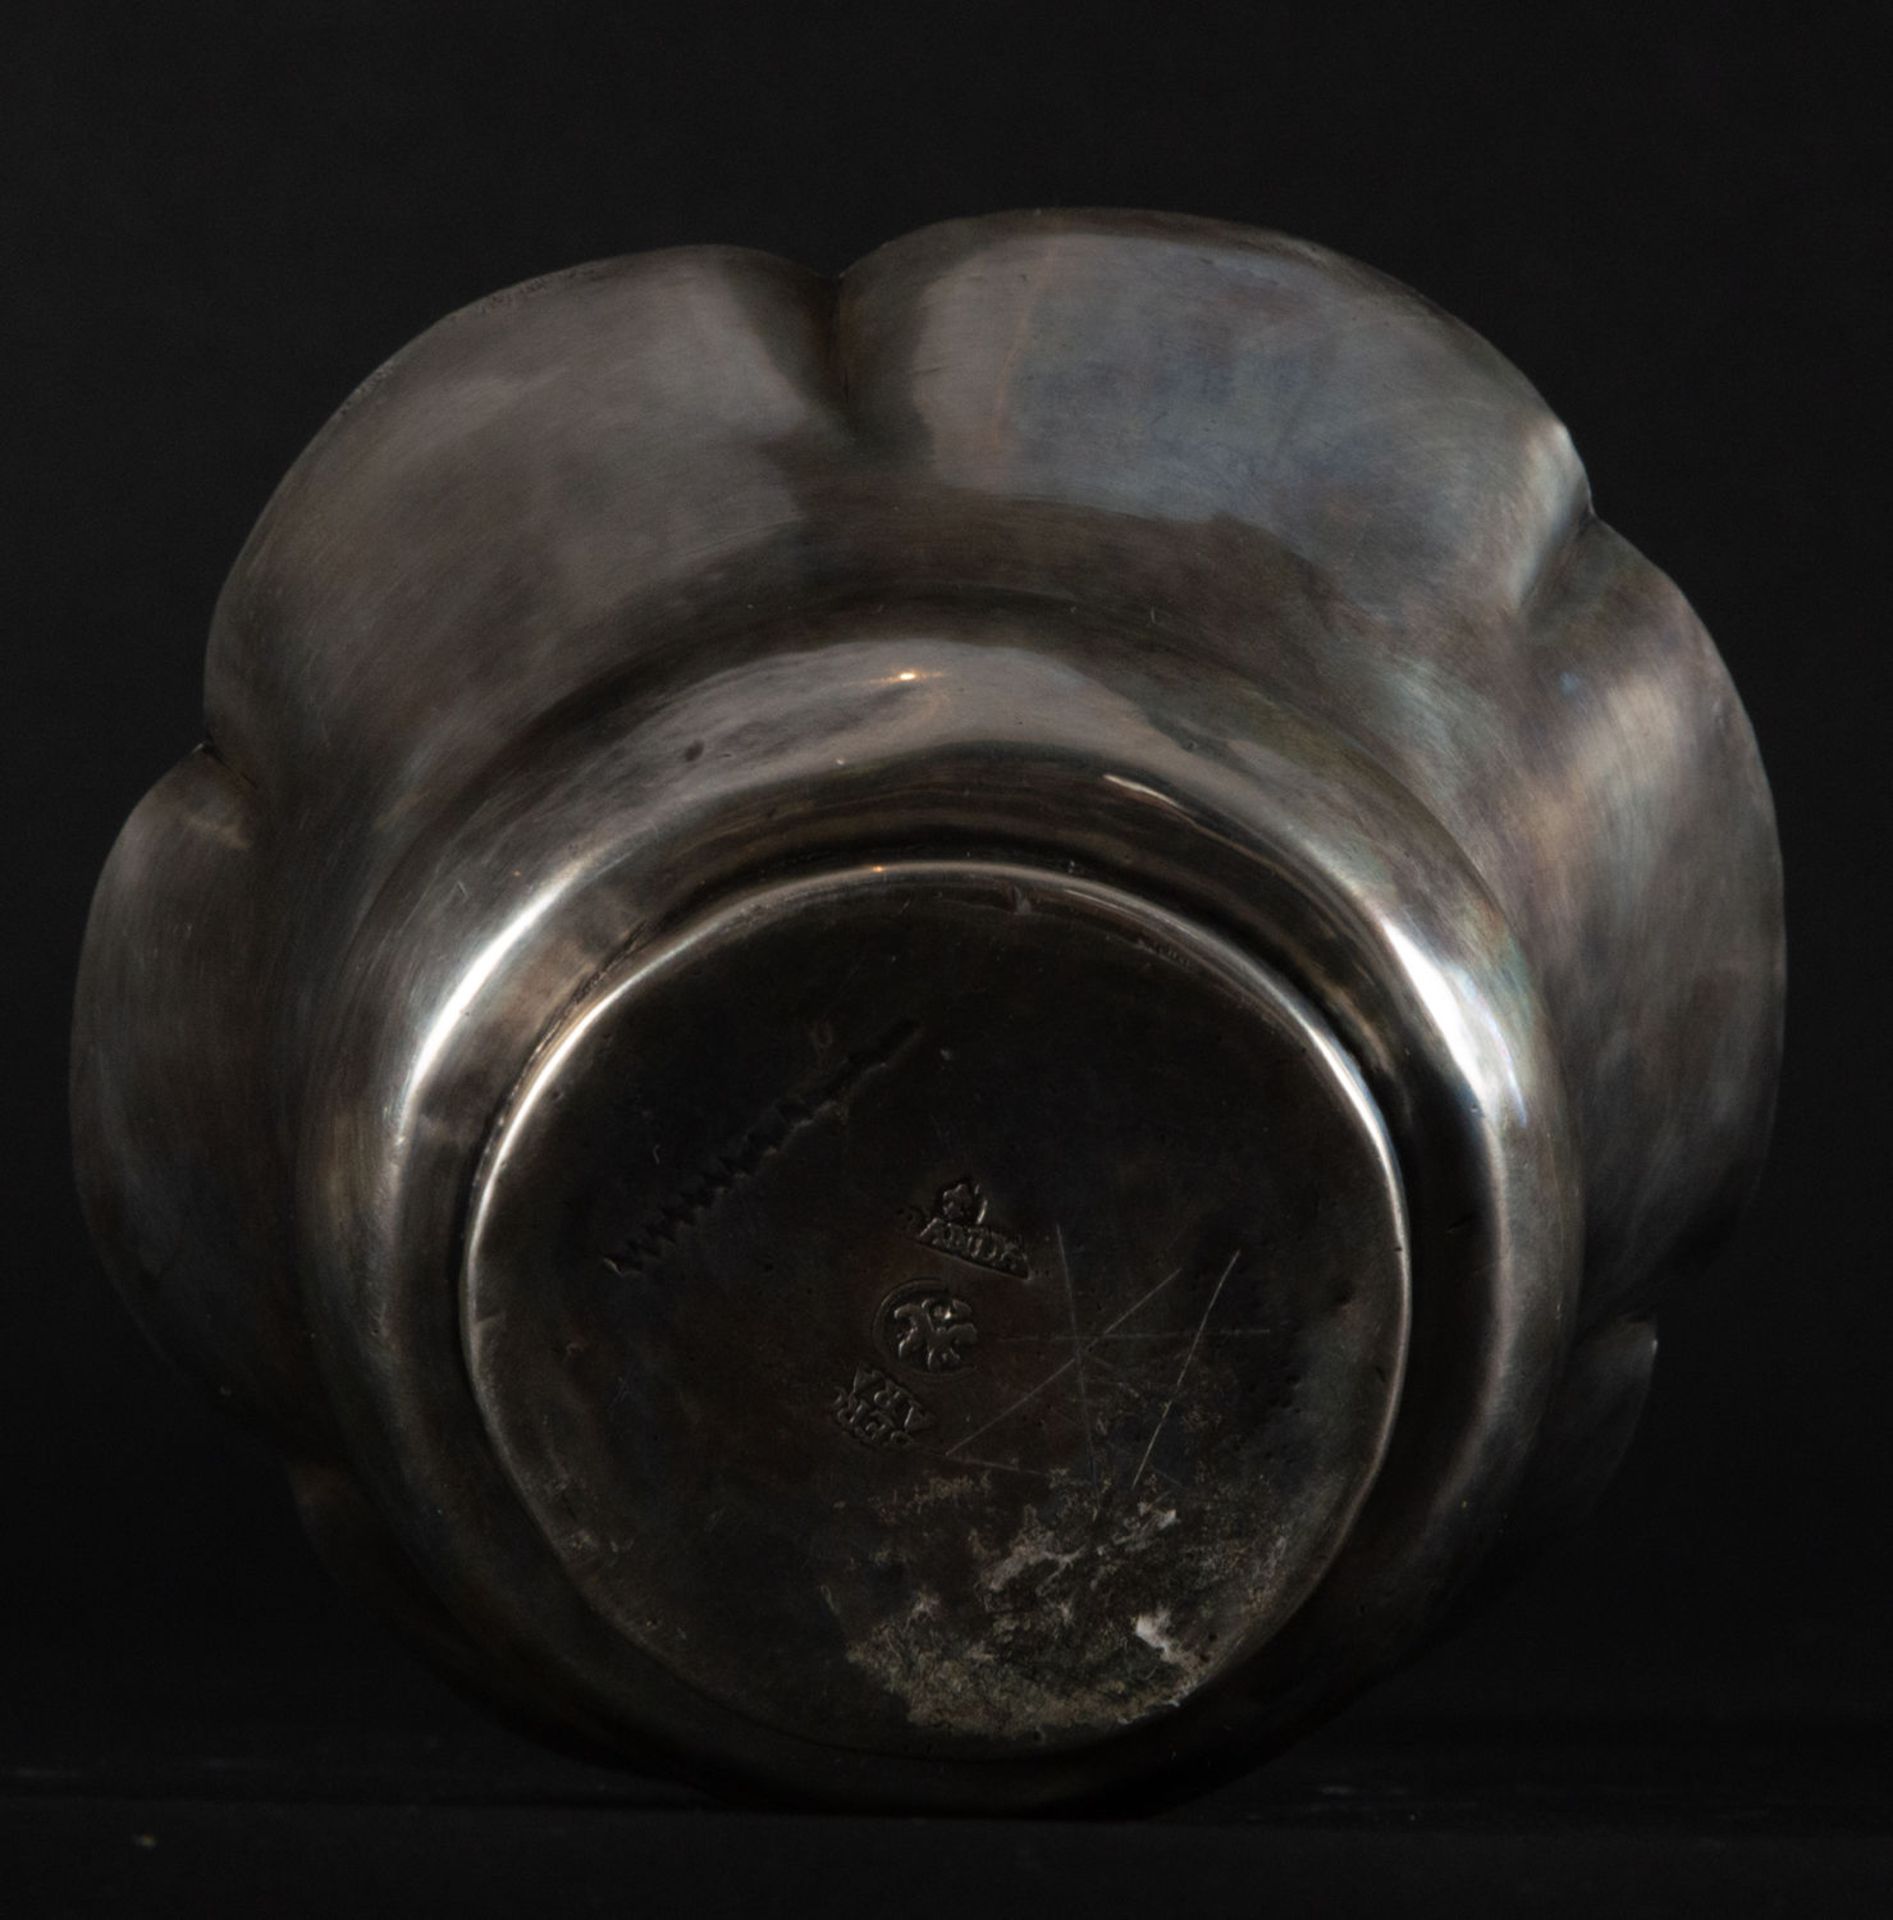 Pair of Wine Glass and Salvilla in solid silver from the 18th century, marks of Grande, Córdoba - Image 2 of 5